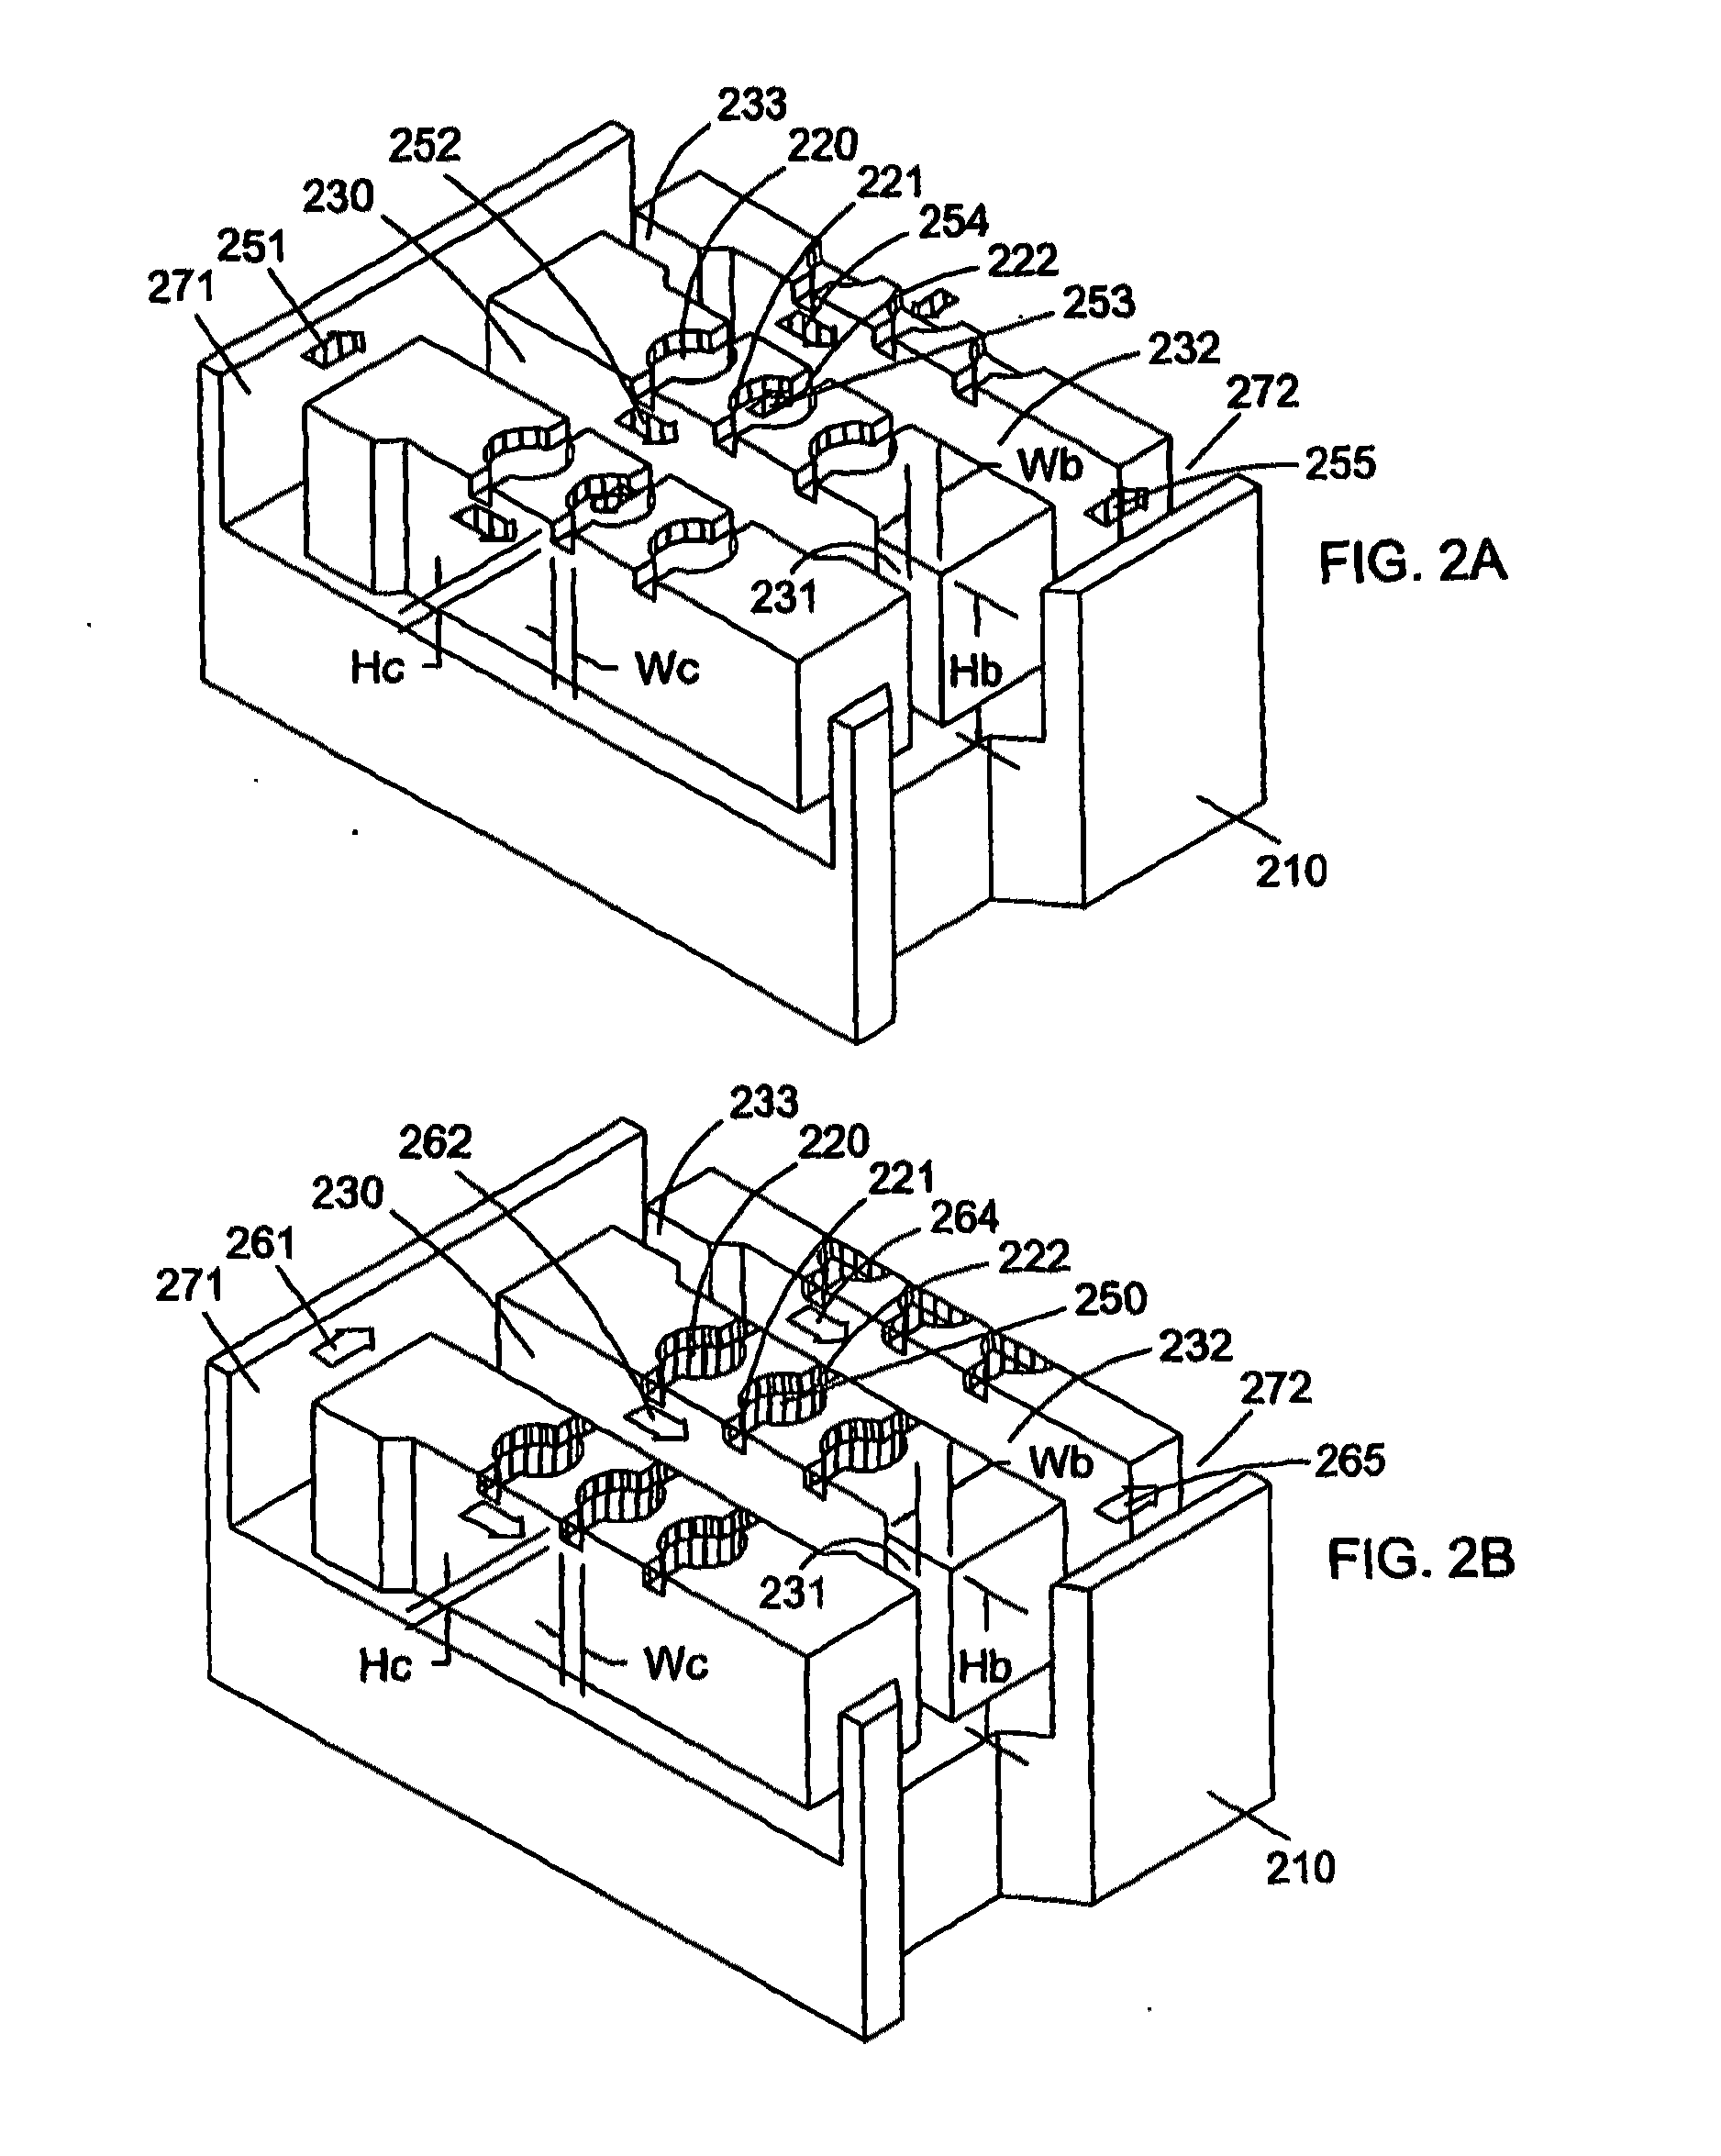 Fluidic devices and methods for multiplex chemical and biochemical reactions